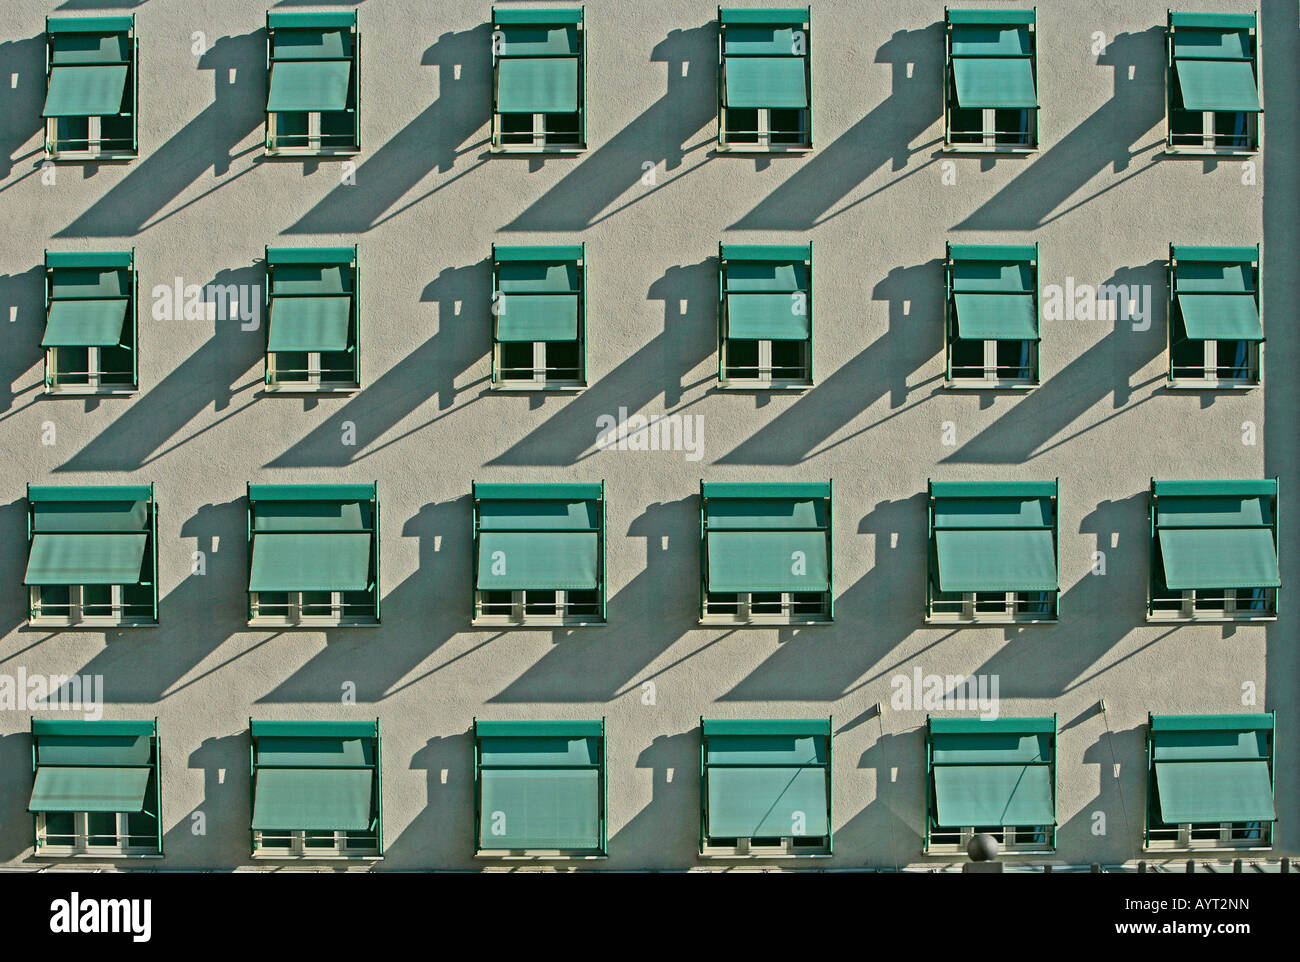 Building facade, shutters on the windows, front view Stock Photo